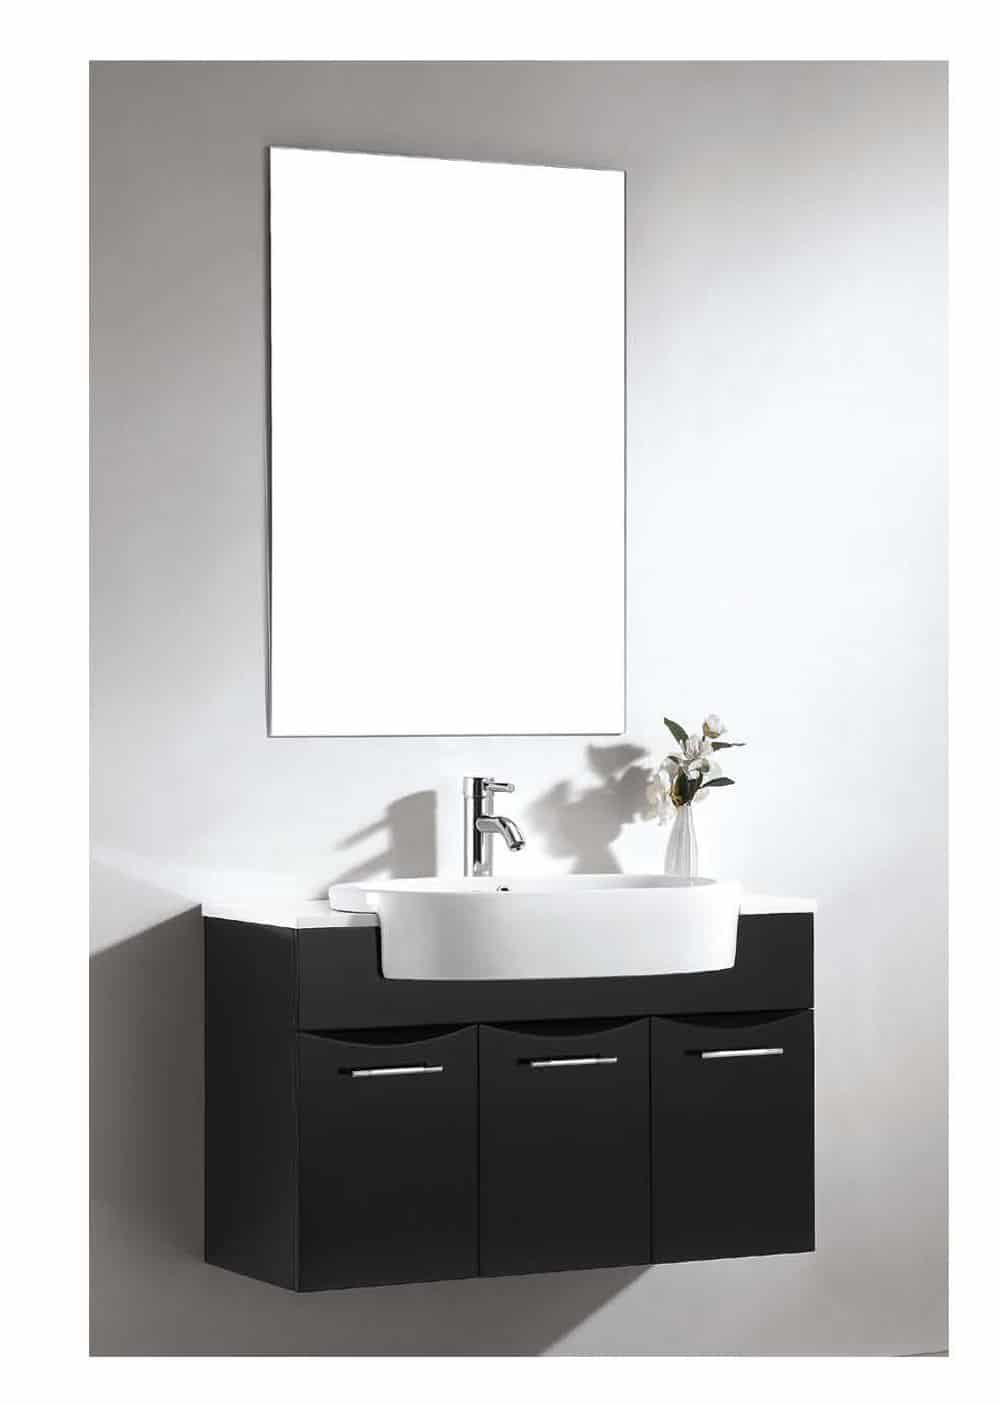 Dawn RET251405-06 Ceramic Lavatory 5-14 Thickness Sink Top with Overflow and Single Hole Faucet Deck